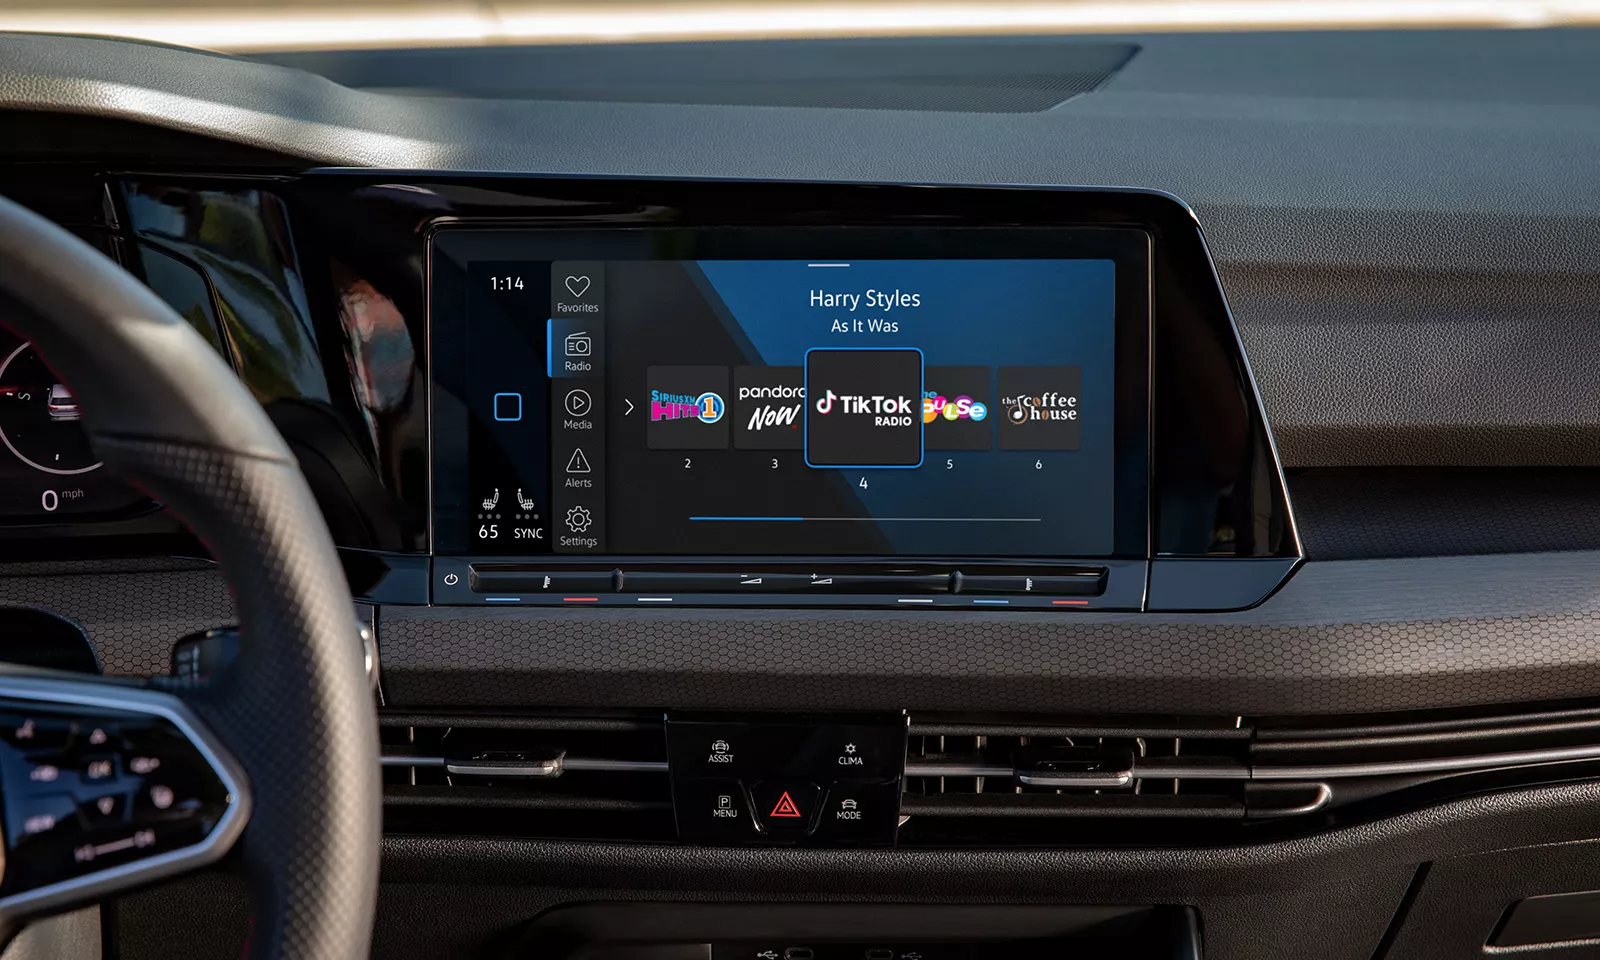 2023 VW Golf GTI Sirius XM showing available channels